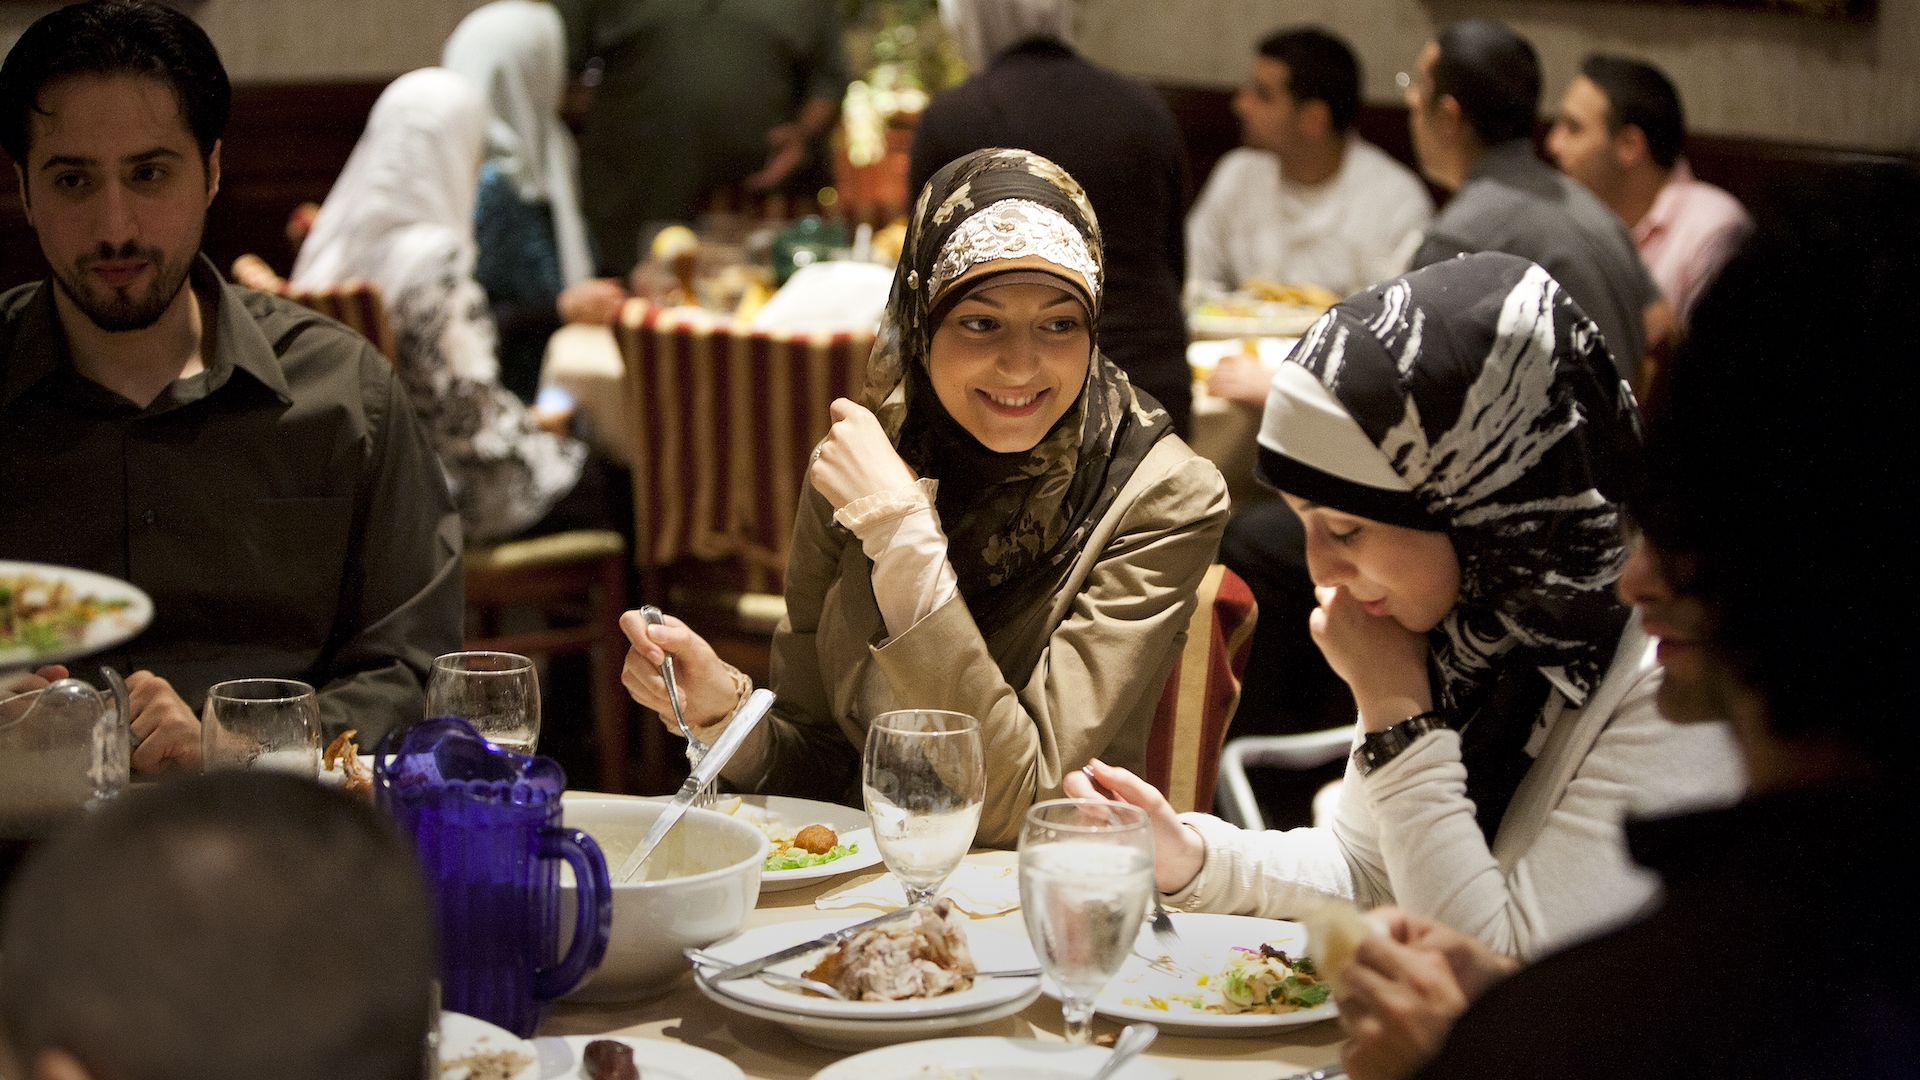 A group of diners breaks the Ramadan fast with iftar at Habib's Cuisine in Dearborn, Michigan. Photo credit: State Dept./Brian Widdis